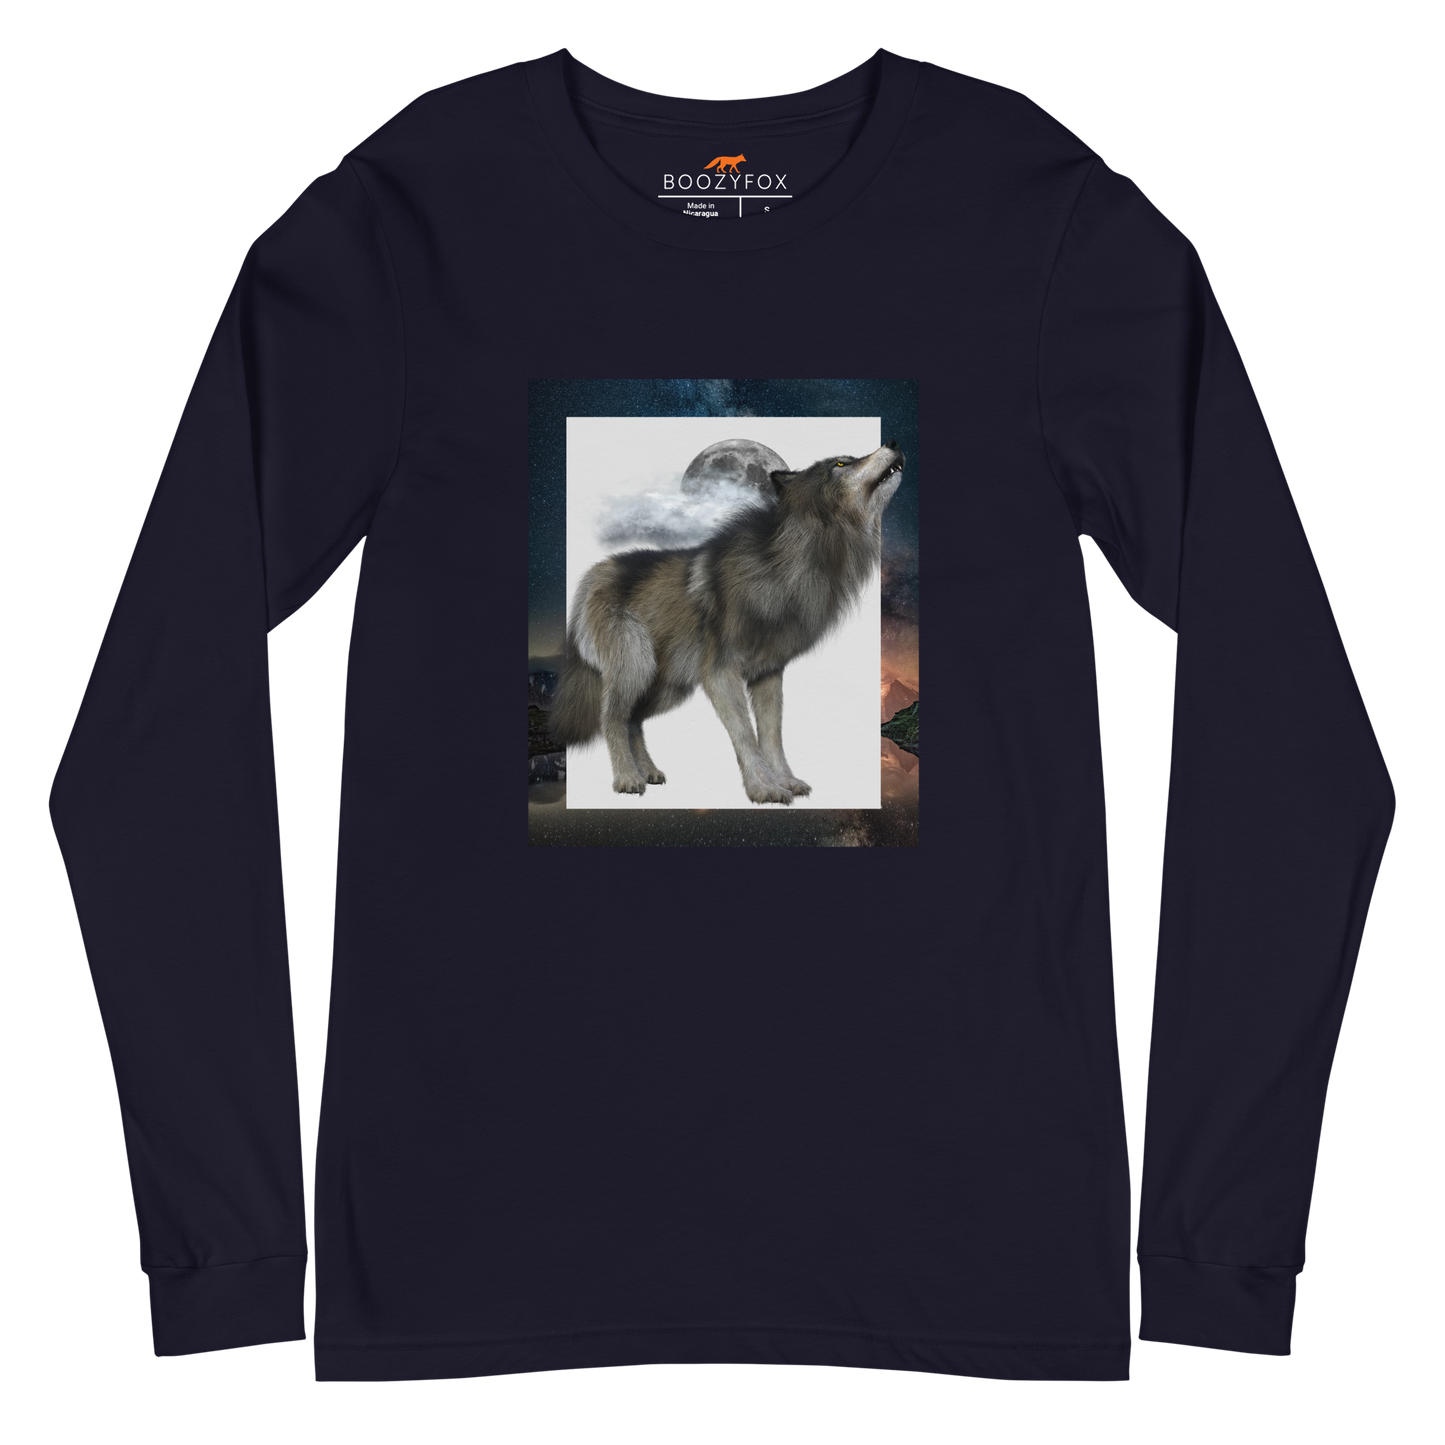 Navy Wolf Long Sleeve Tee featuring a fierce Howling Wolf graphic on the chest - Cool Wolf Long Sleeve Graphic Tees - Boozy Fox